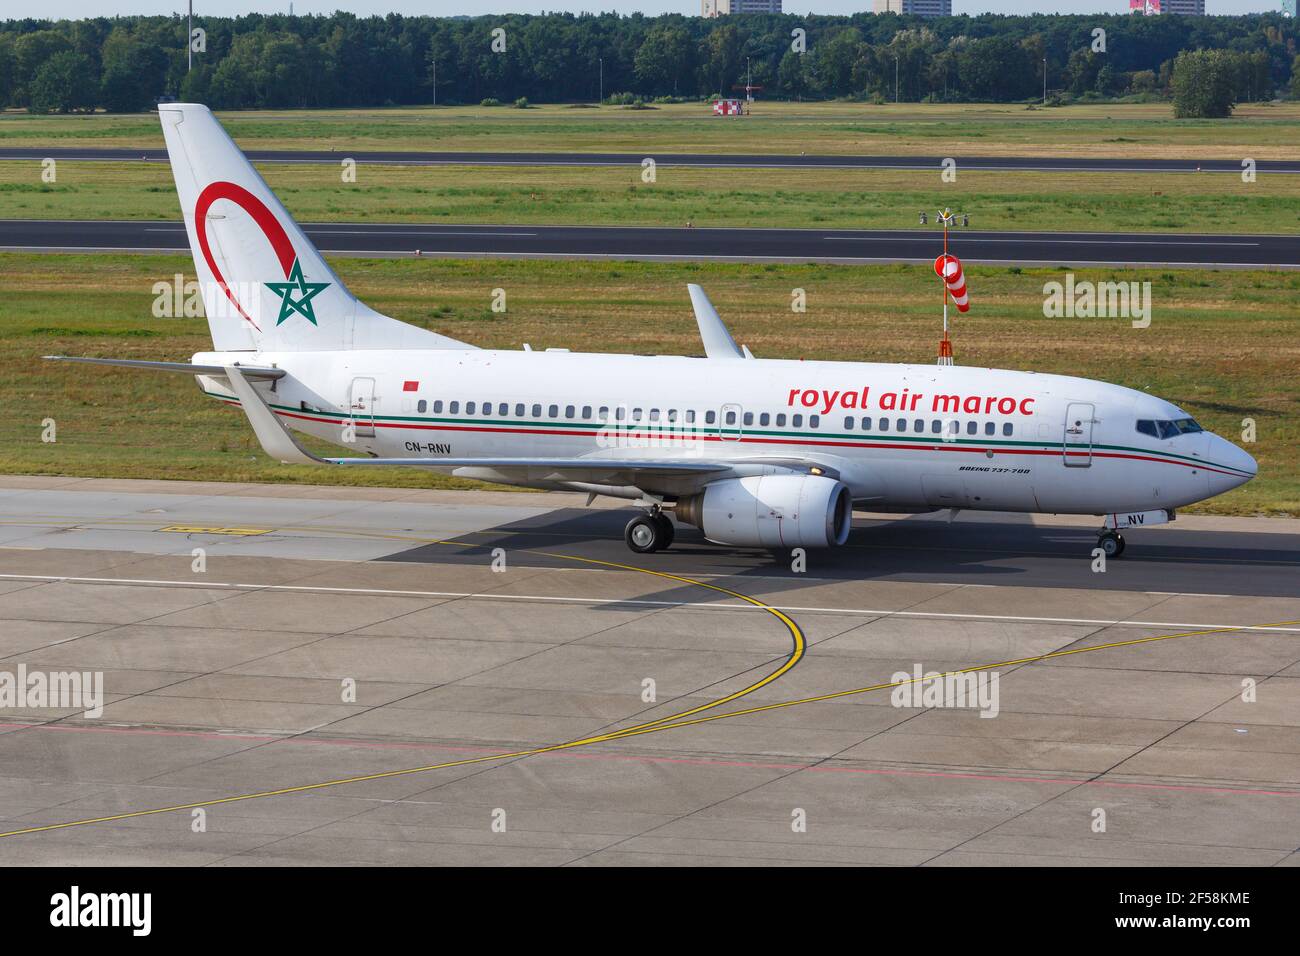 Berlin, Germany – 30. August 2017: Royal Air Maroc Boeing 737 at Berlin Tegel airport (TXL) in Germany. Boeing is an aircraft manufacturer based in Se Stock Photo